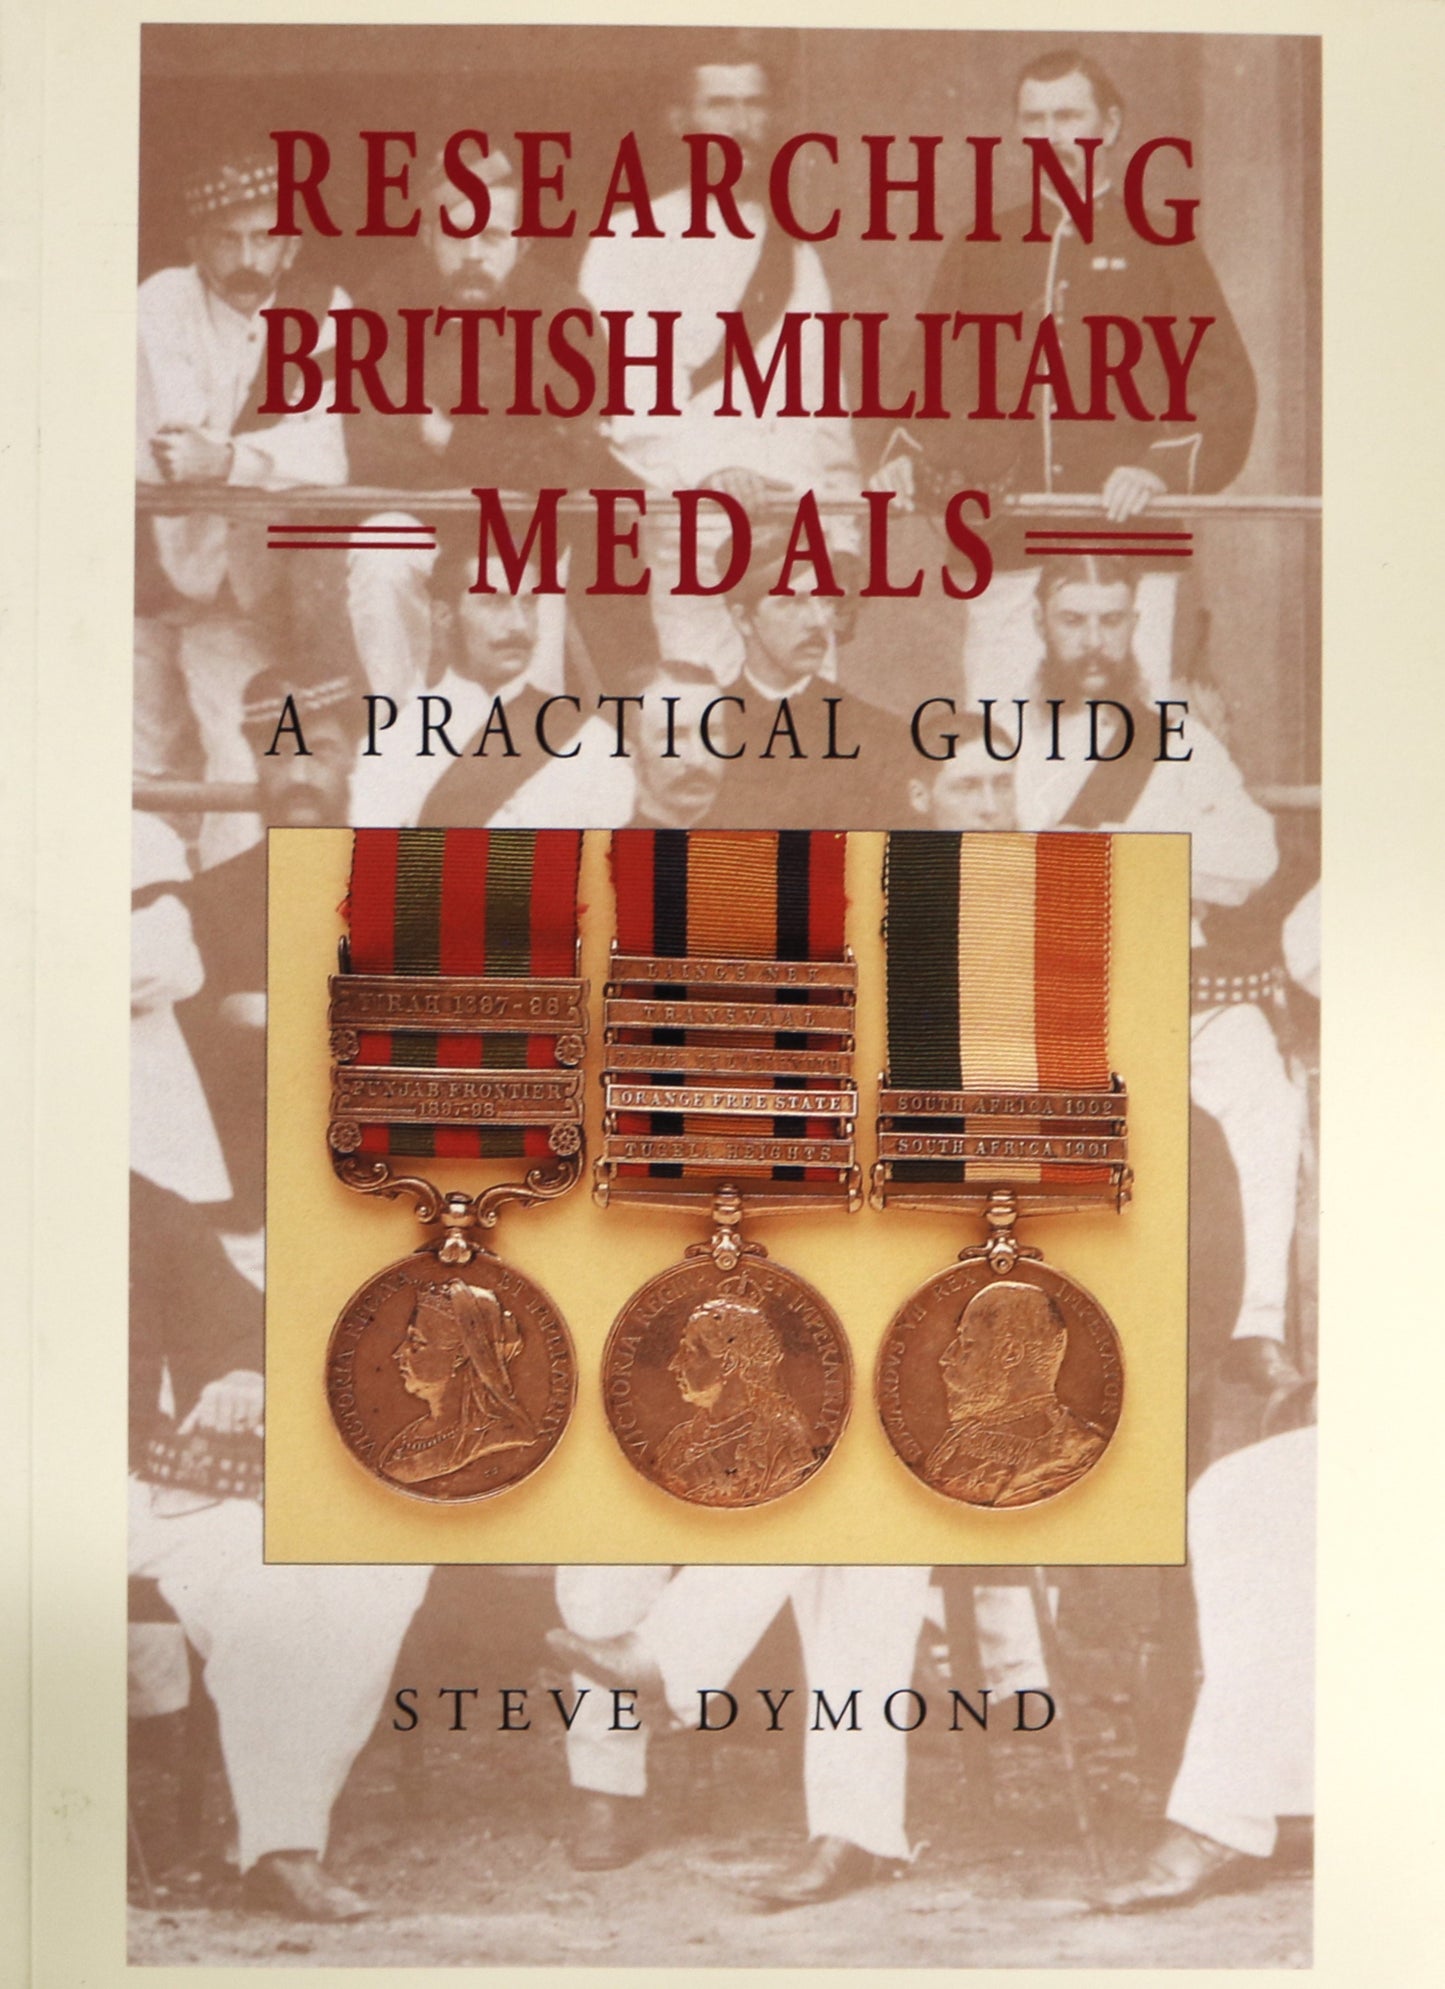 Researching British Britain Military Medals Honours System Practical Guide Book